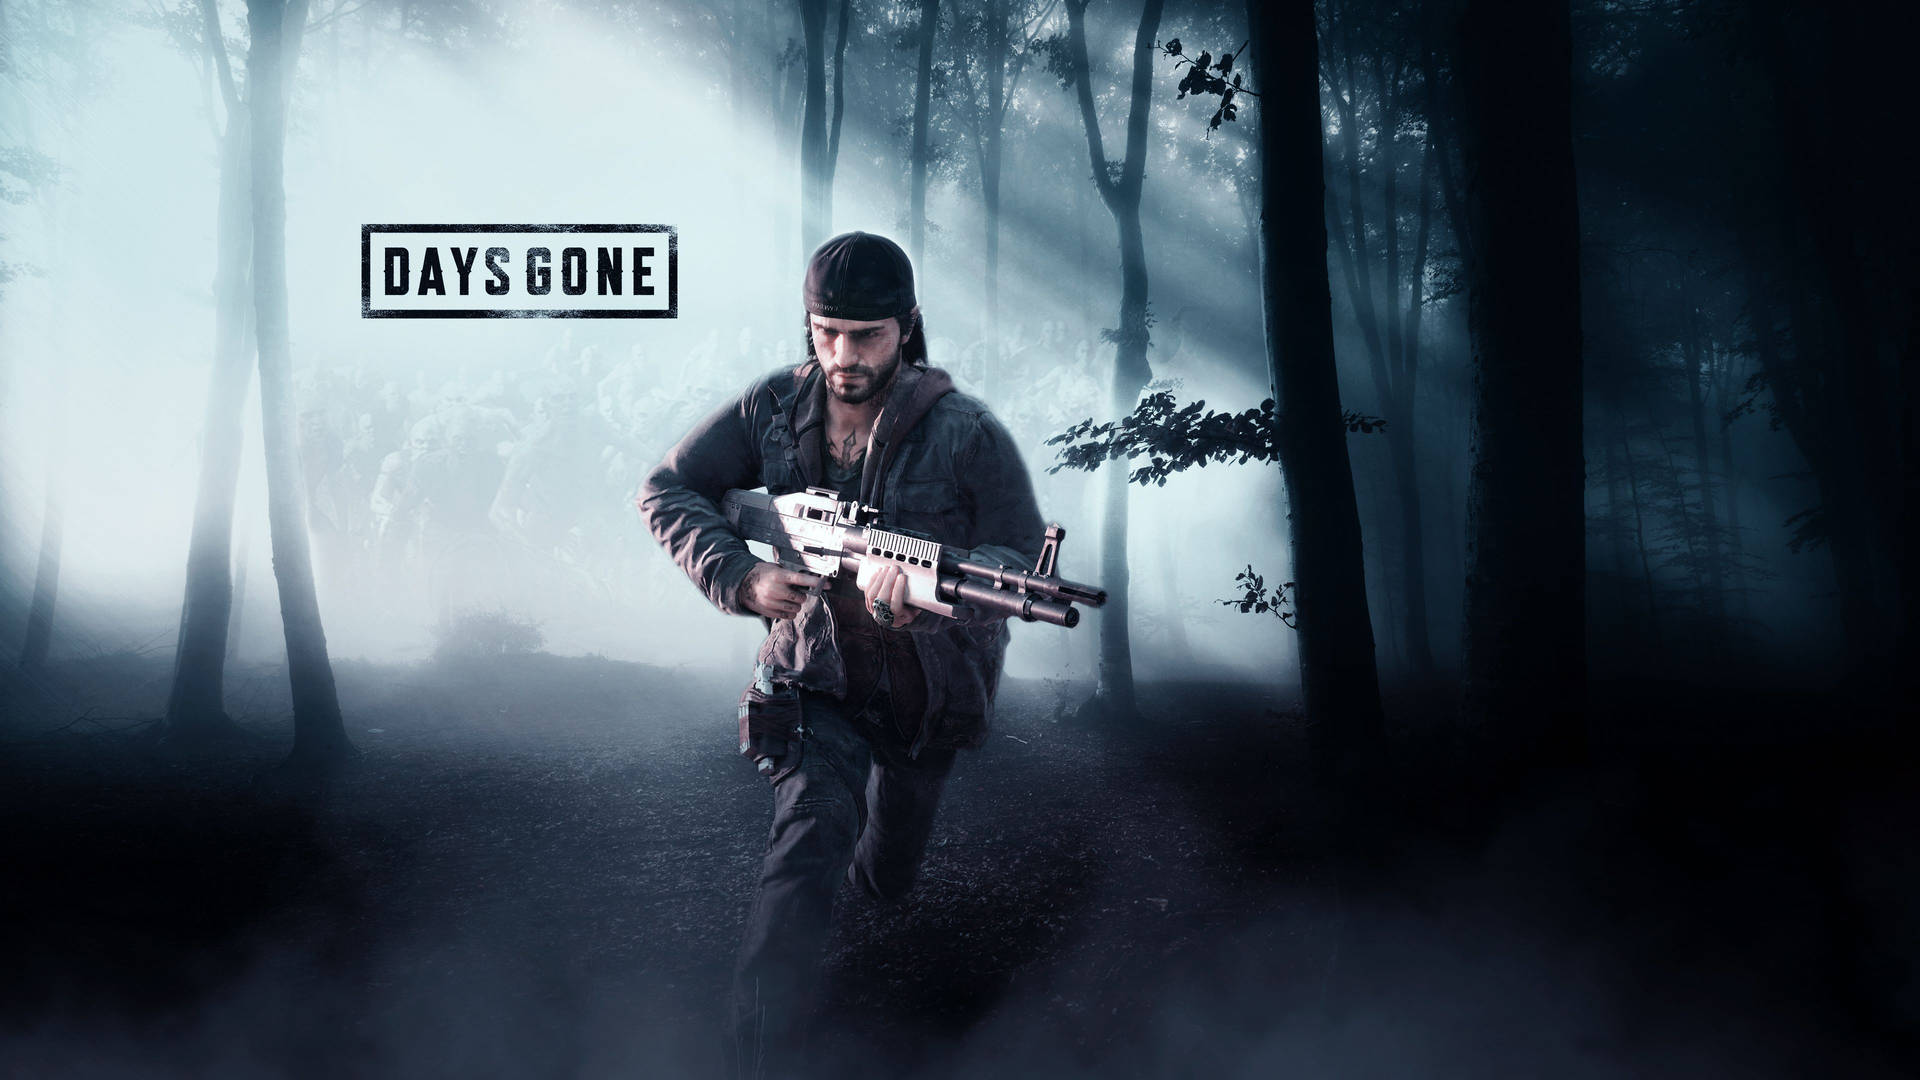 Free download Best 35 Days Gone by Wallpaper on HipWallpaper Gone Girl  [1920x1080] for your Desktop, Mobile & Tablet | Explore 41+ Days Gone  Mobile Wallpapers | School Days Wallpaper, Rainy Days